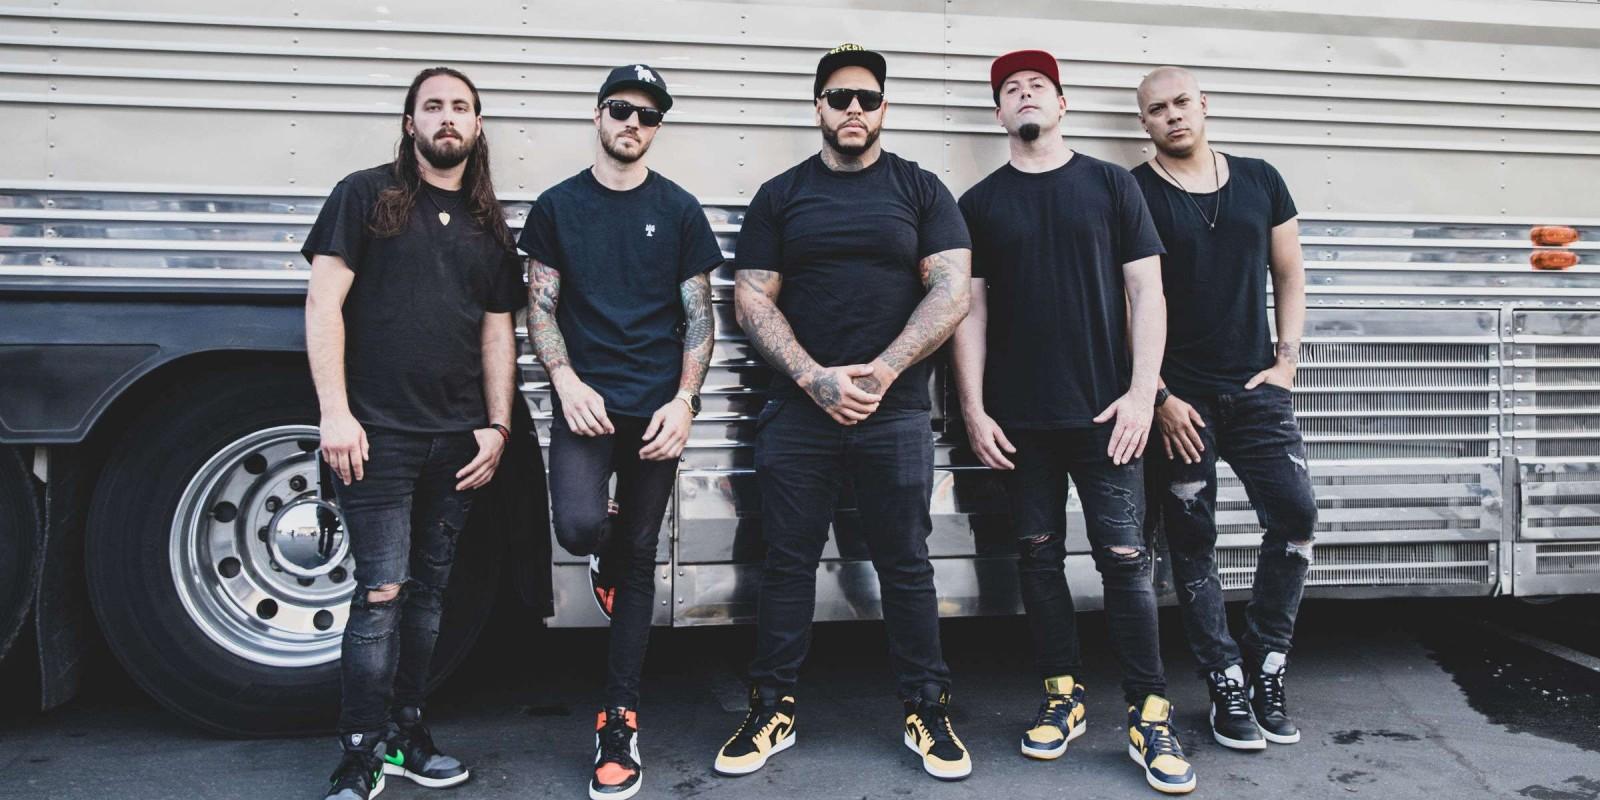 BAD WOLVES' “ZOMBIE” CERTIFIED PLATINUM IN THE U.S